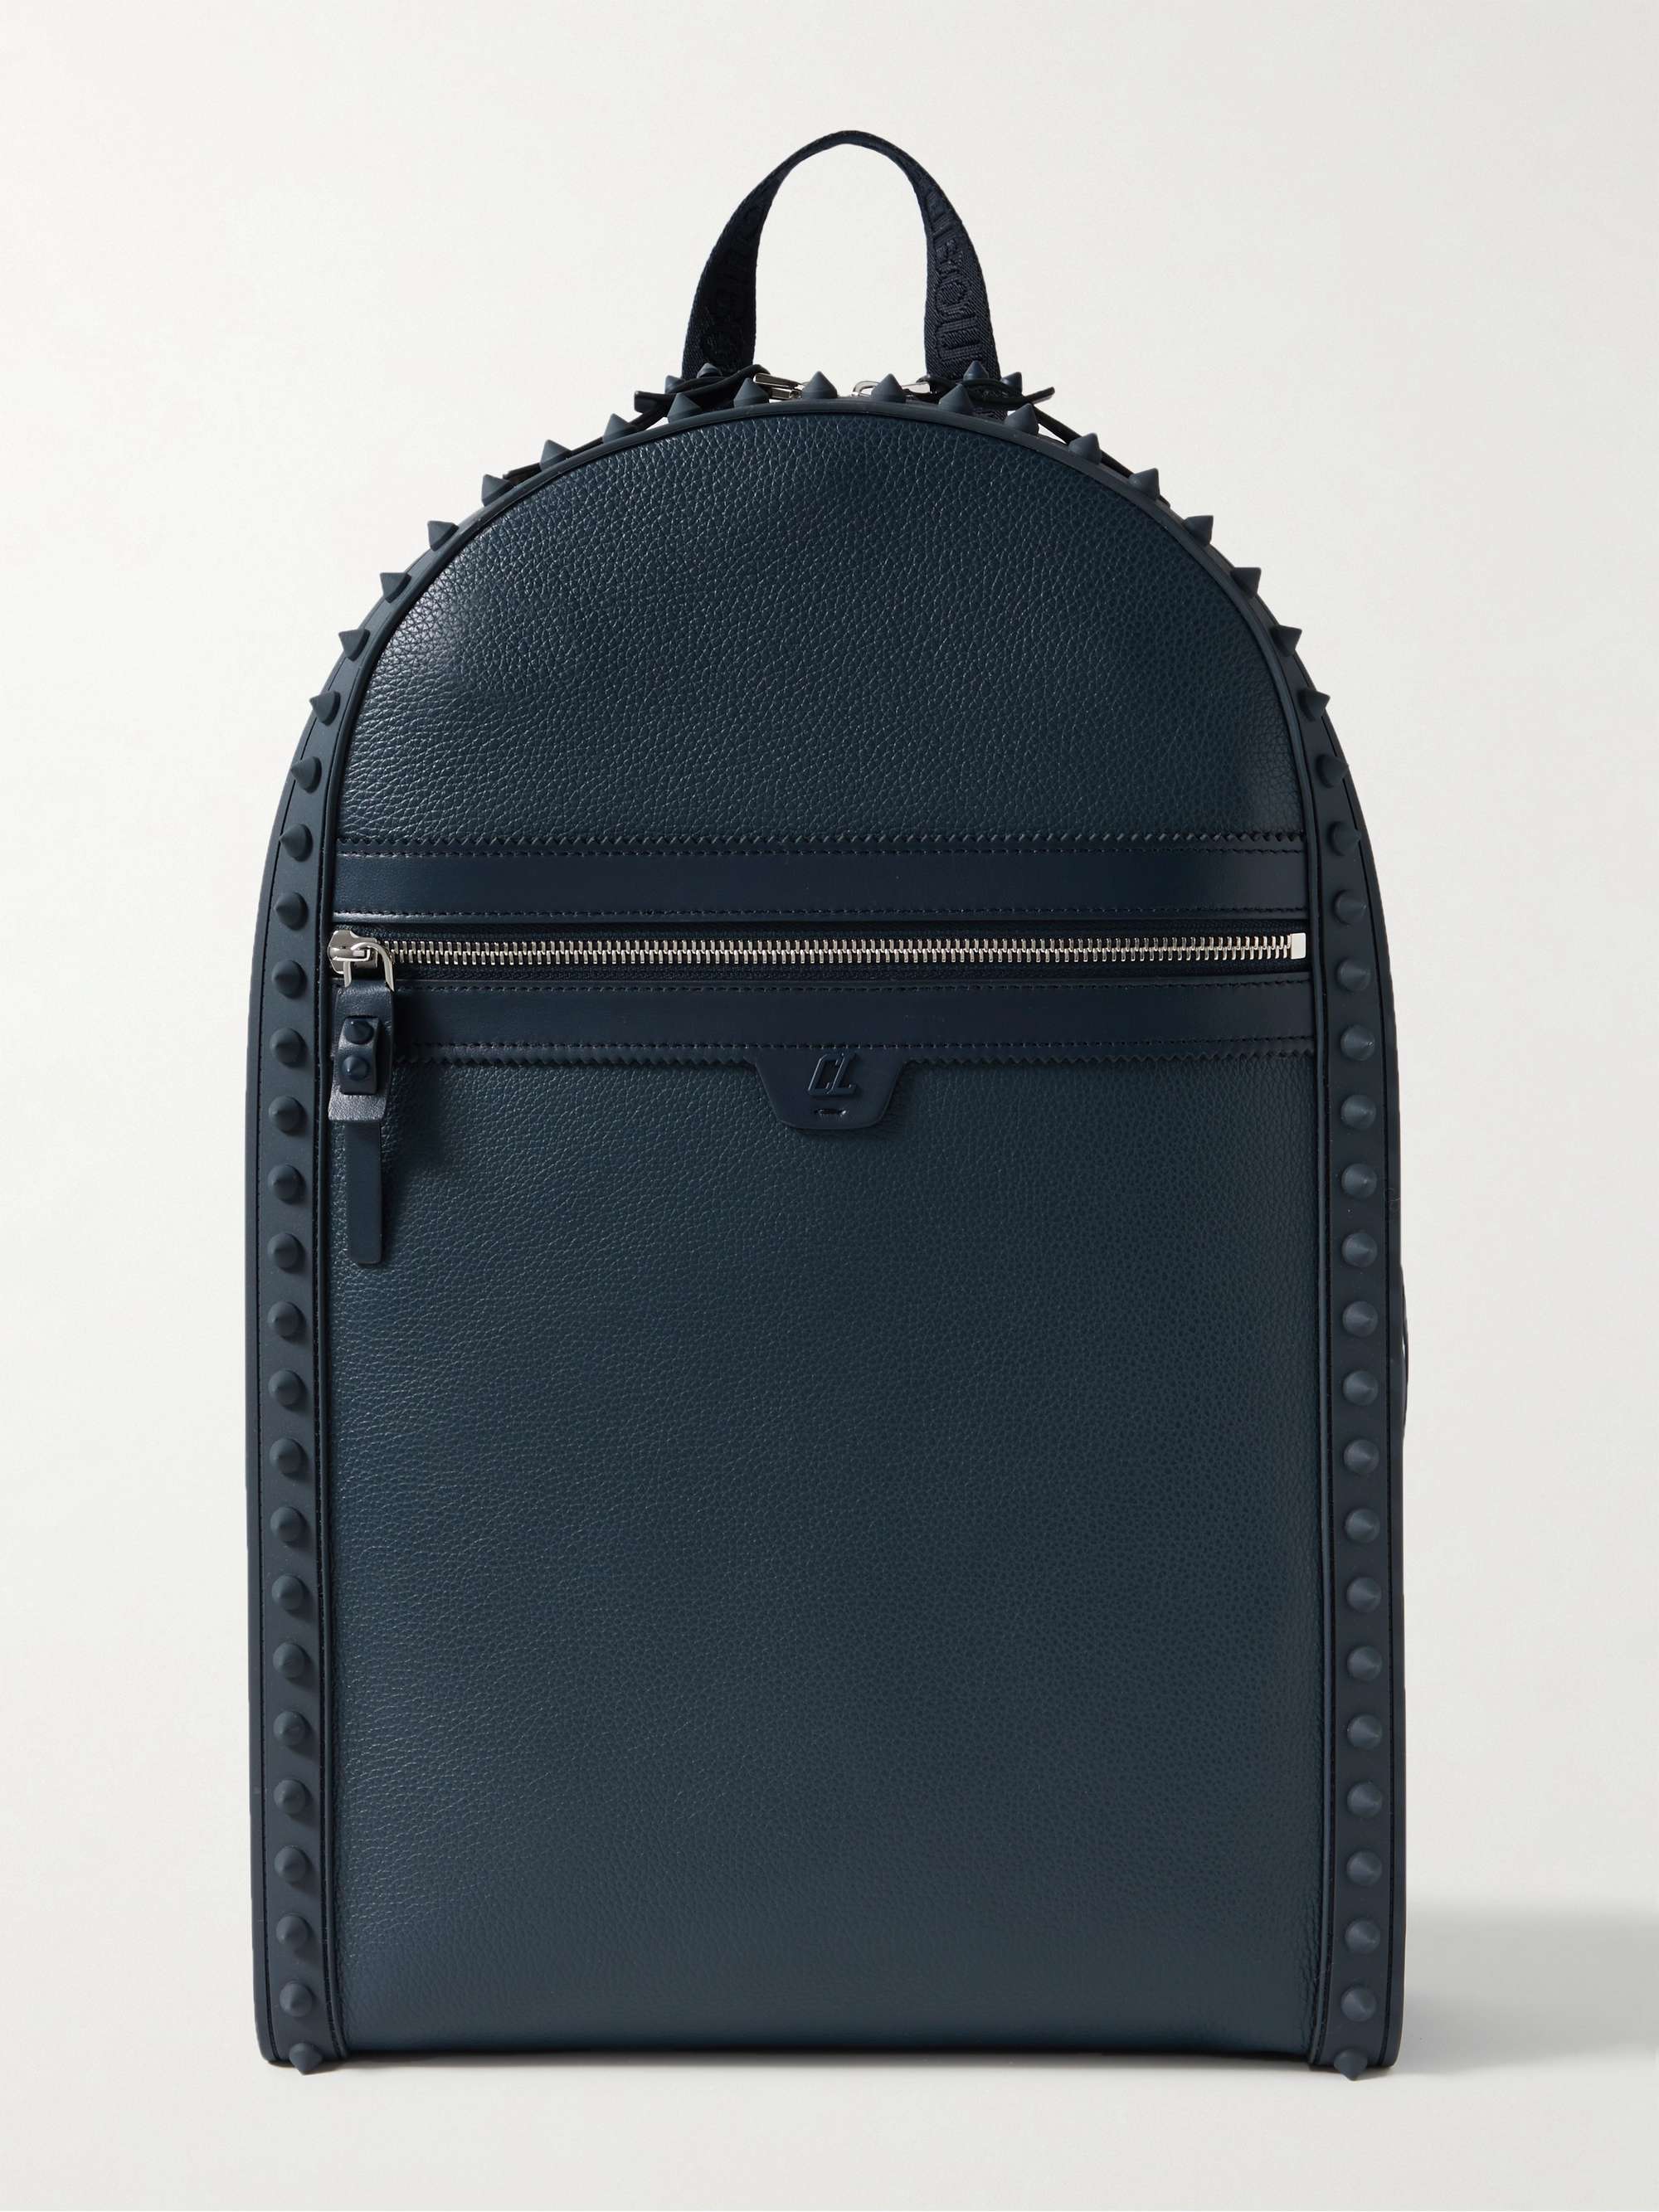 CHRISTIAN LOUBOUTIN Backparis Spiked Rubber-Trimmed Full-Grain Leather Backpack